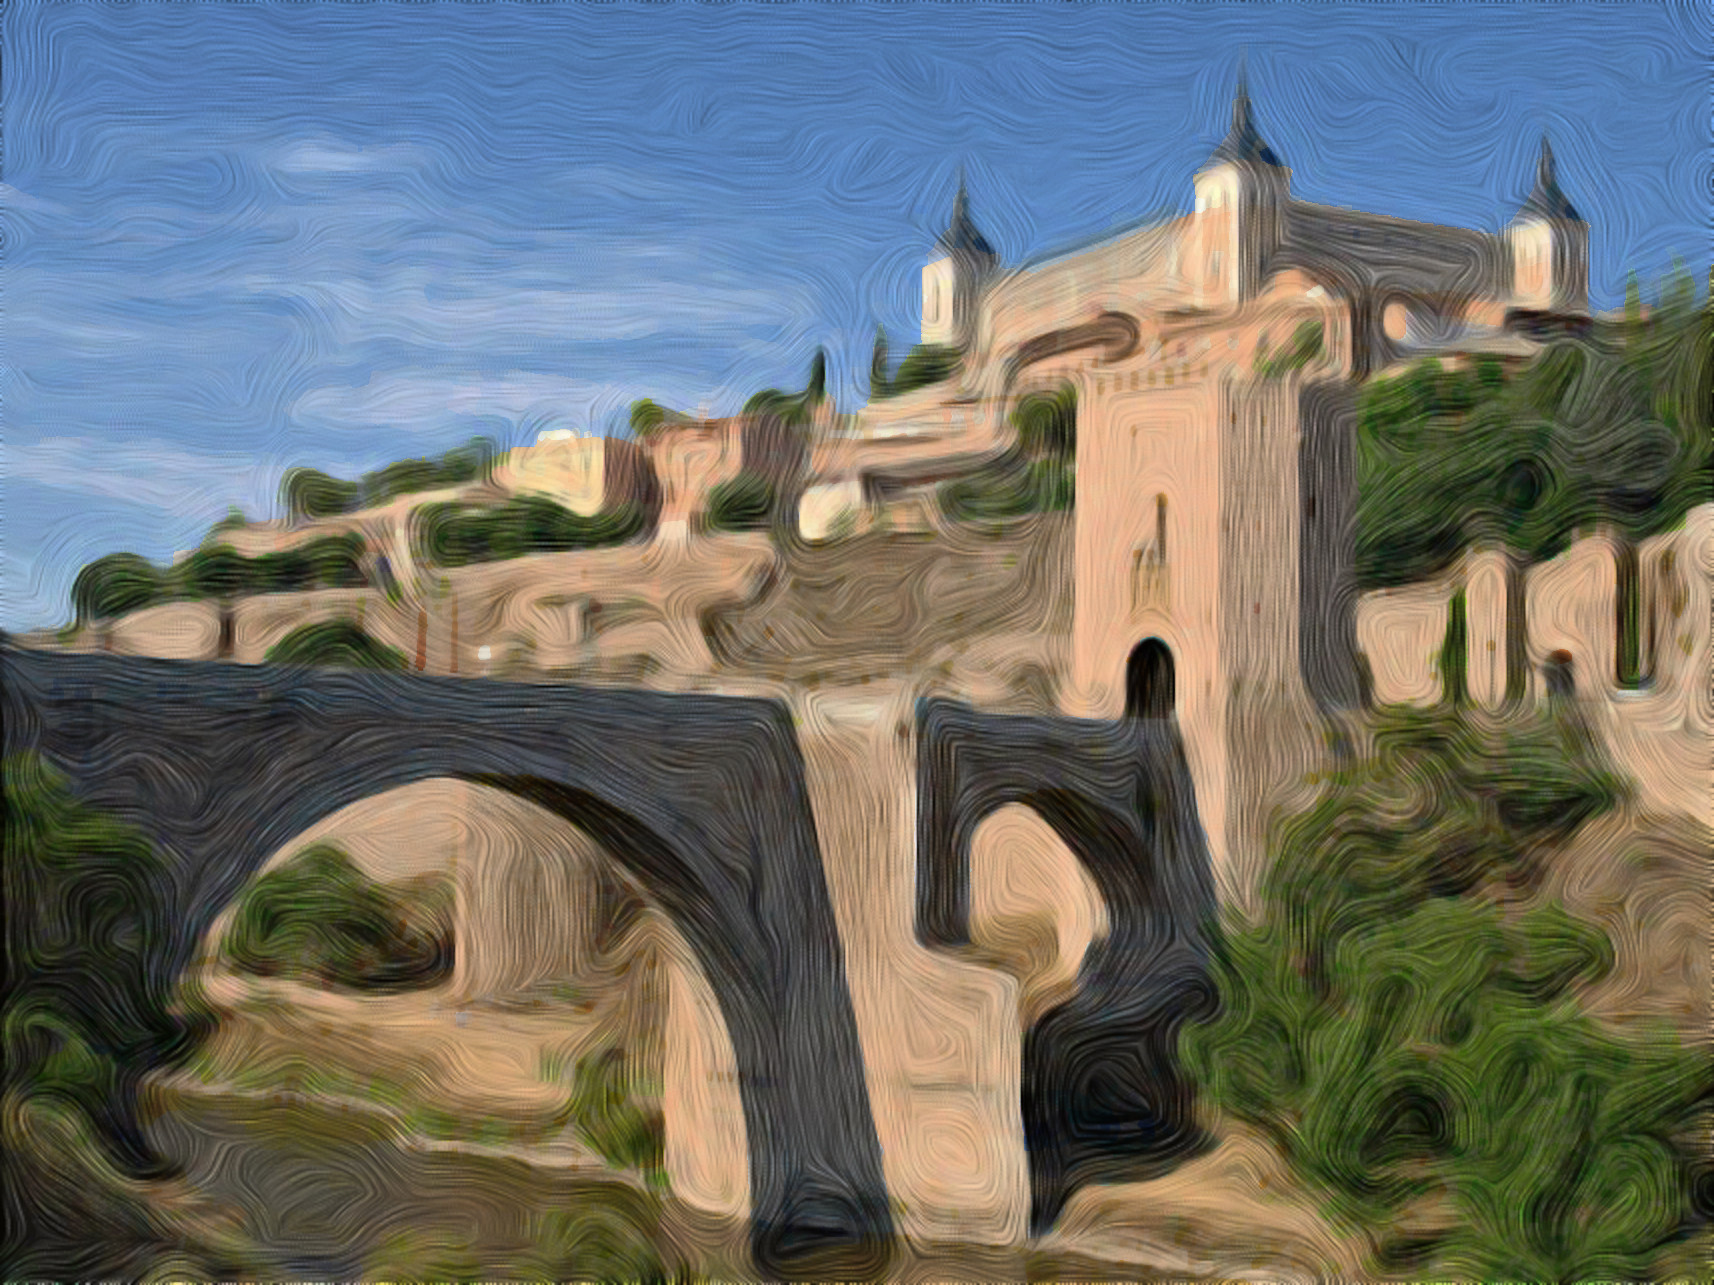 Toledo_DN_SimpleGraphics_FingerPaint_with colours-rayees.jpg